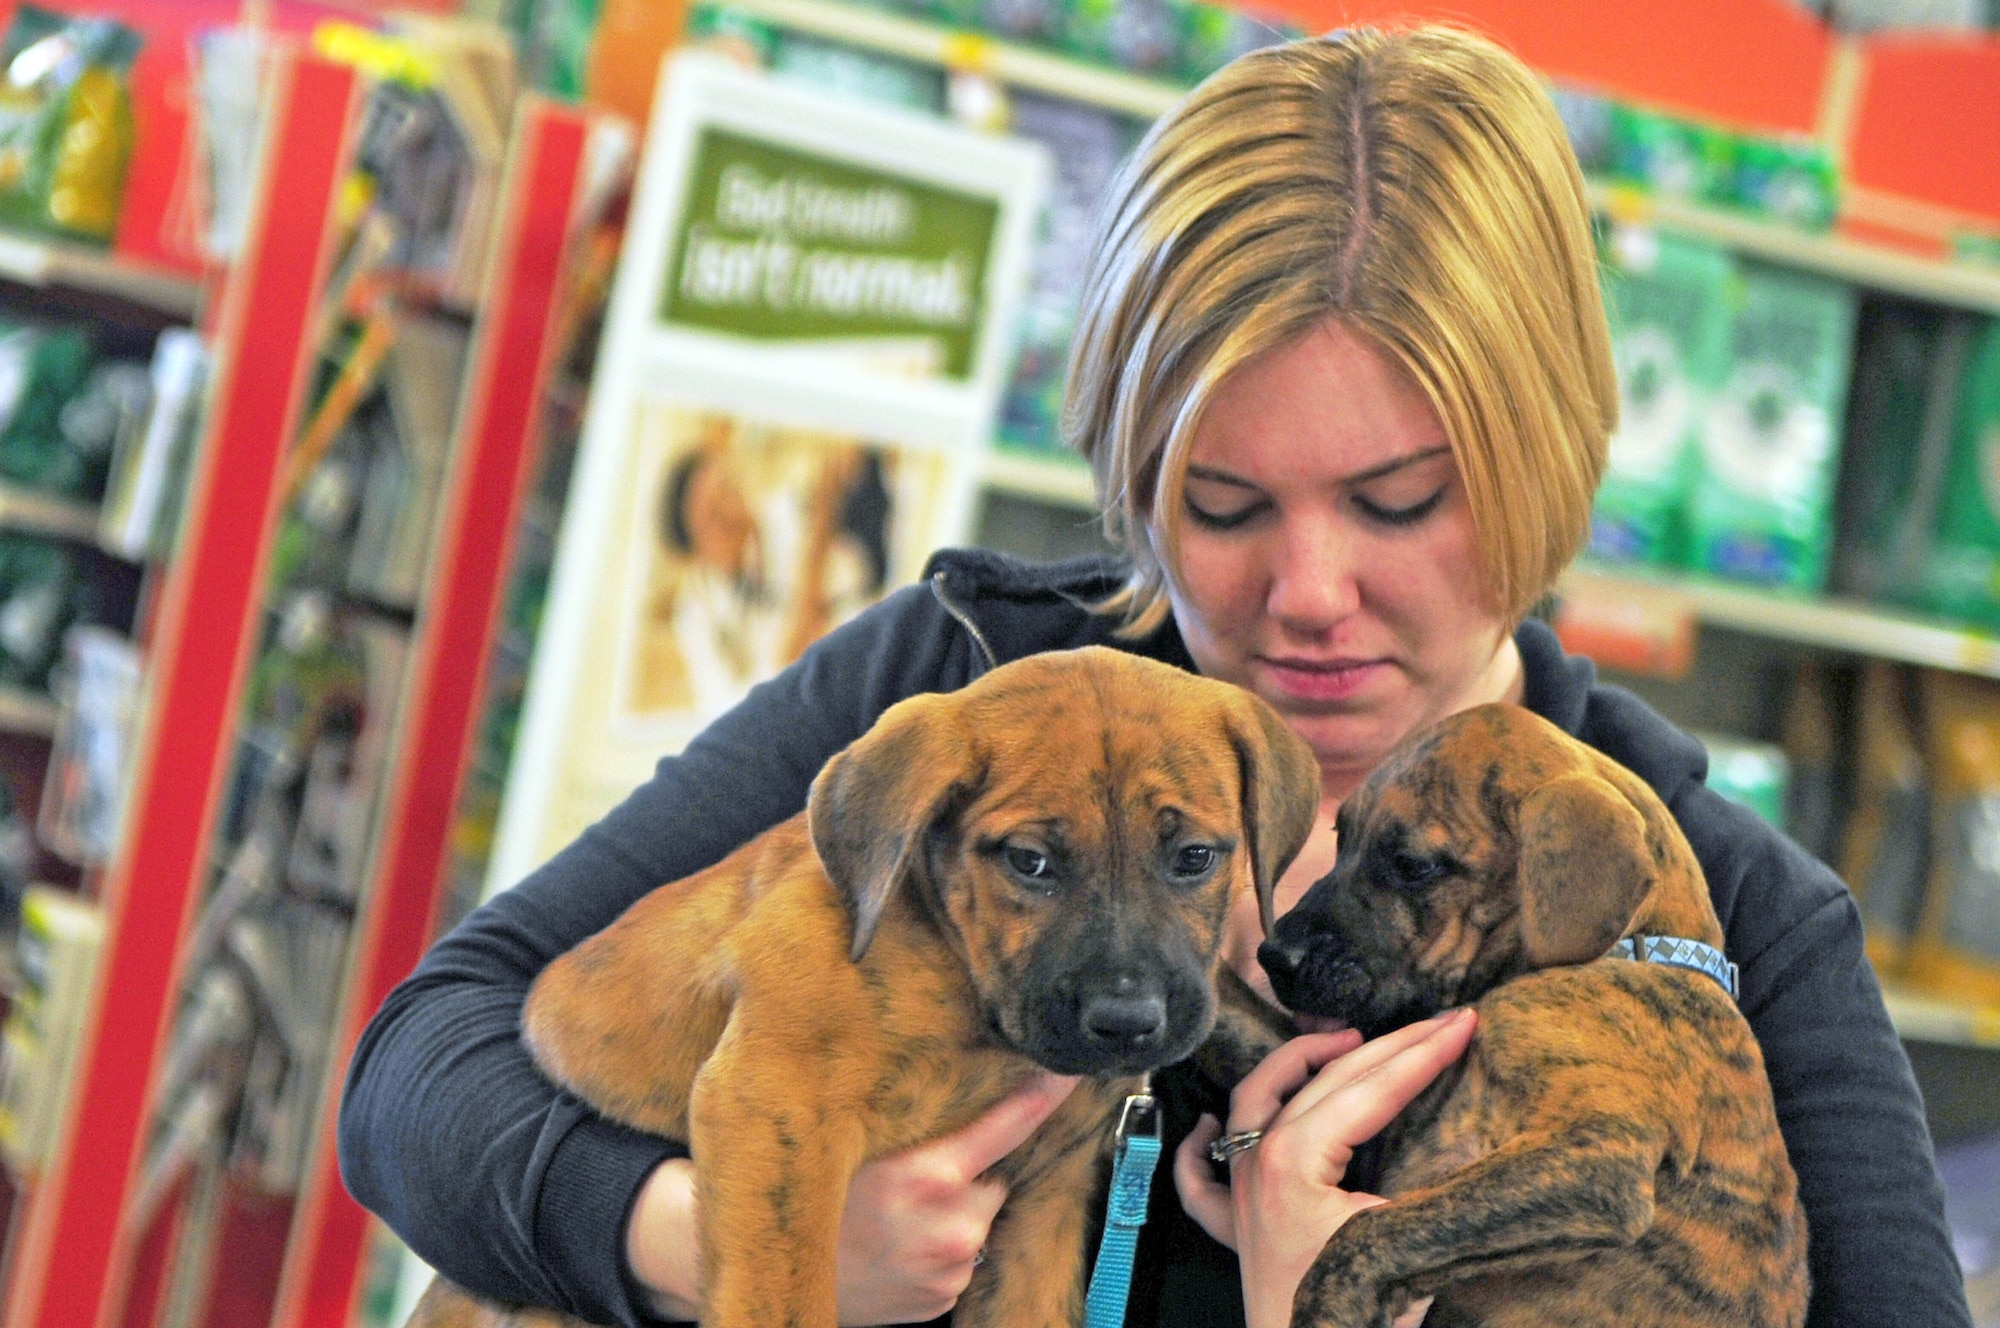 BOSSIER CITY, La. -- Staff Sgt. Samantha Plemmons, 2d Aerospace Medical Squadron, holds two puppies while volunteering for the Bossier City Animal Control's Hand-in-Paw adoption day at Petsmart April 10. Sergeant Plemmons is the co-founder for the nonprofit organization and dedicates nearly all of her Saturdays to the adoption day. (U.S. Air Force photo by Senior Airman Joanna M. Kresge)